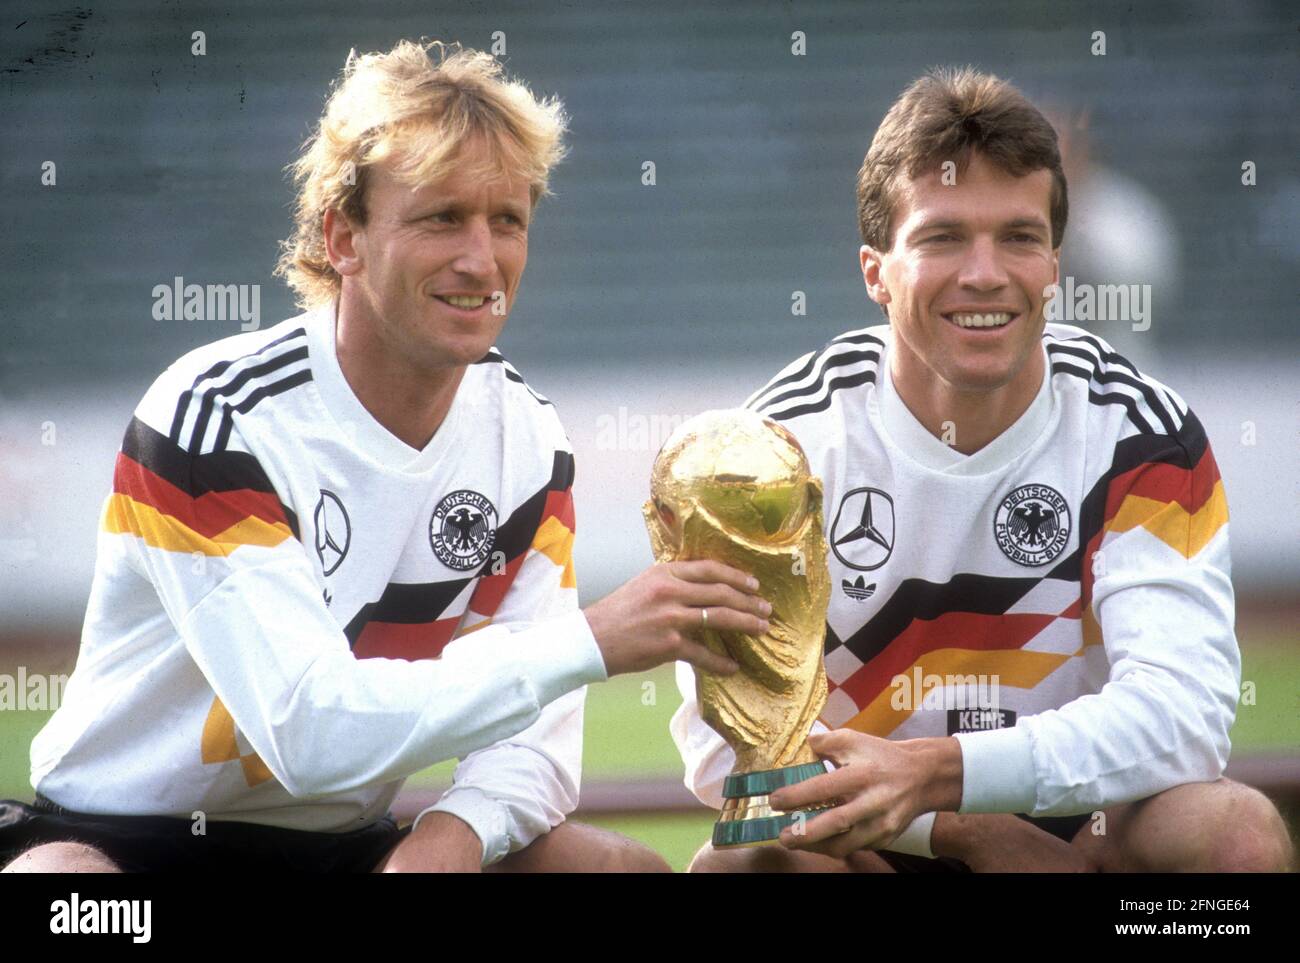 Photo session of the DFB with the 1990 World Champions in Frankfurt/Main. Andreas Brehme (left) and Lothar Matthäus with the World Cup trophy 01.10.1990 (estimated). [automated translation] Stock Photo